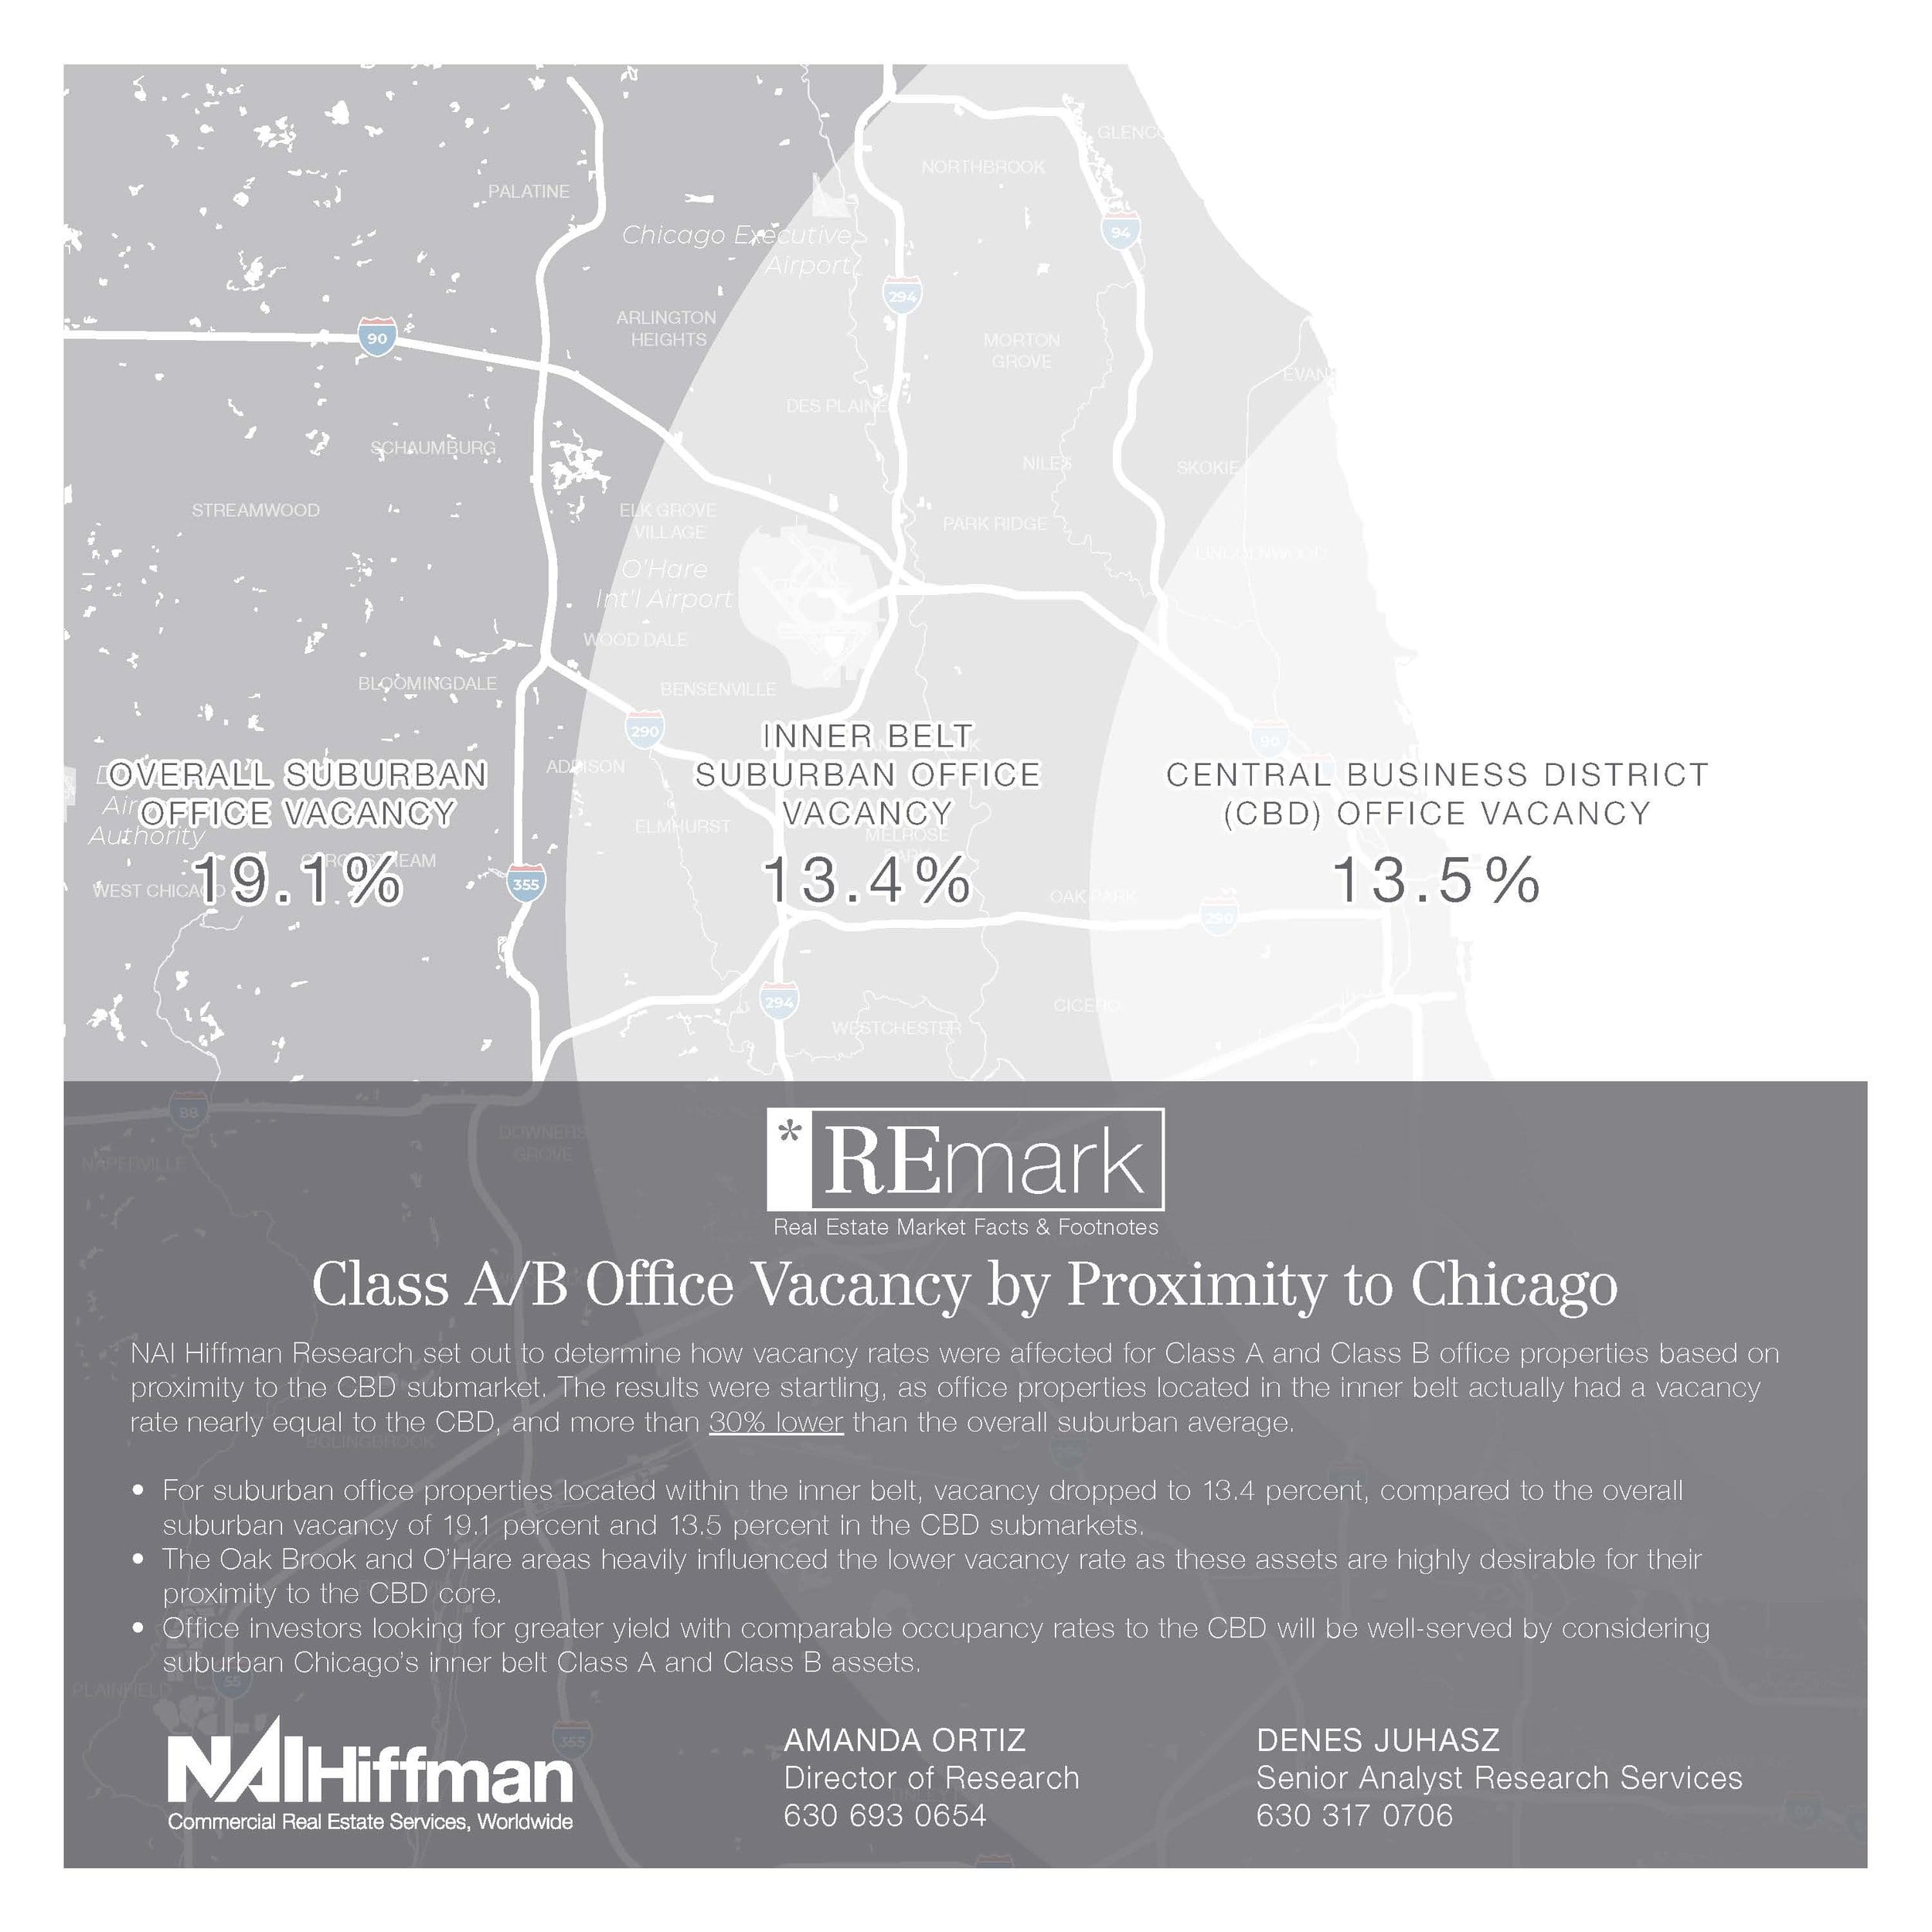 REmark: Class A/B Office Vacancy by Proximity to Chicago